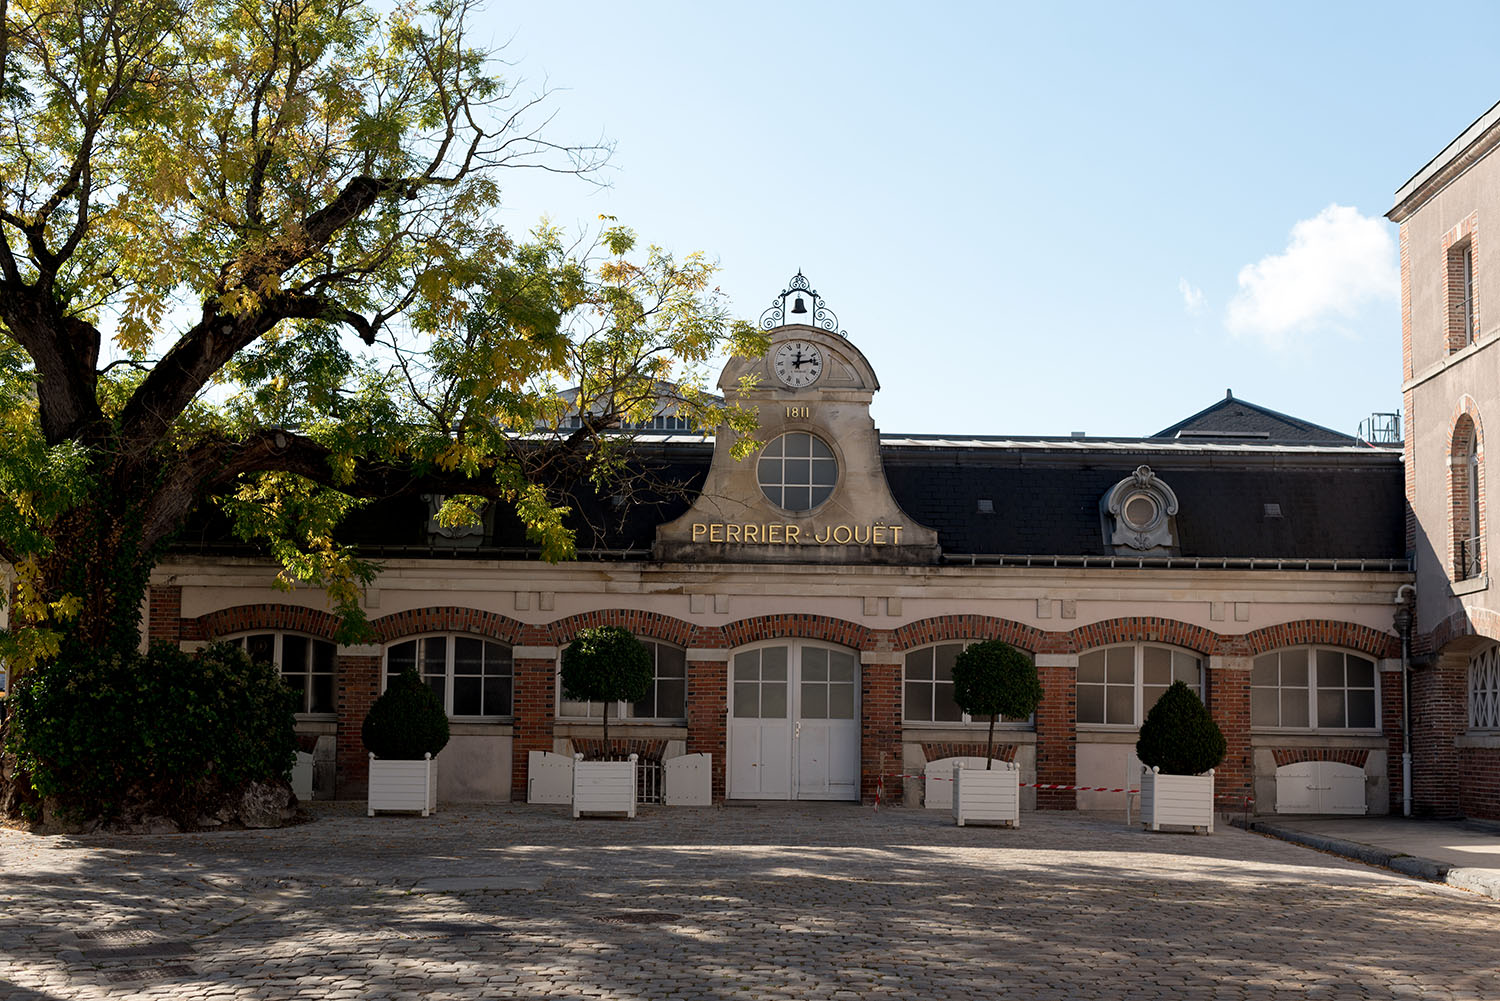 Coco & Vera - Maison Perrier-Jouet in Epernay, France